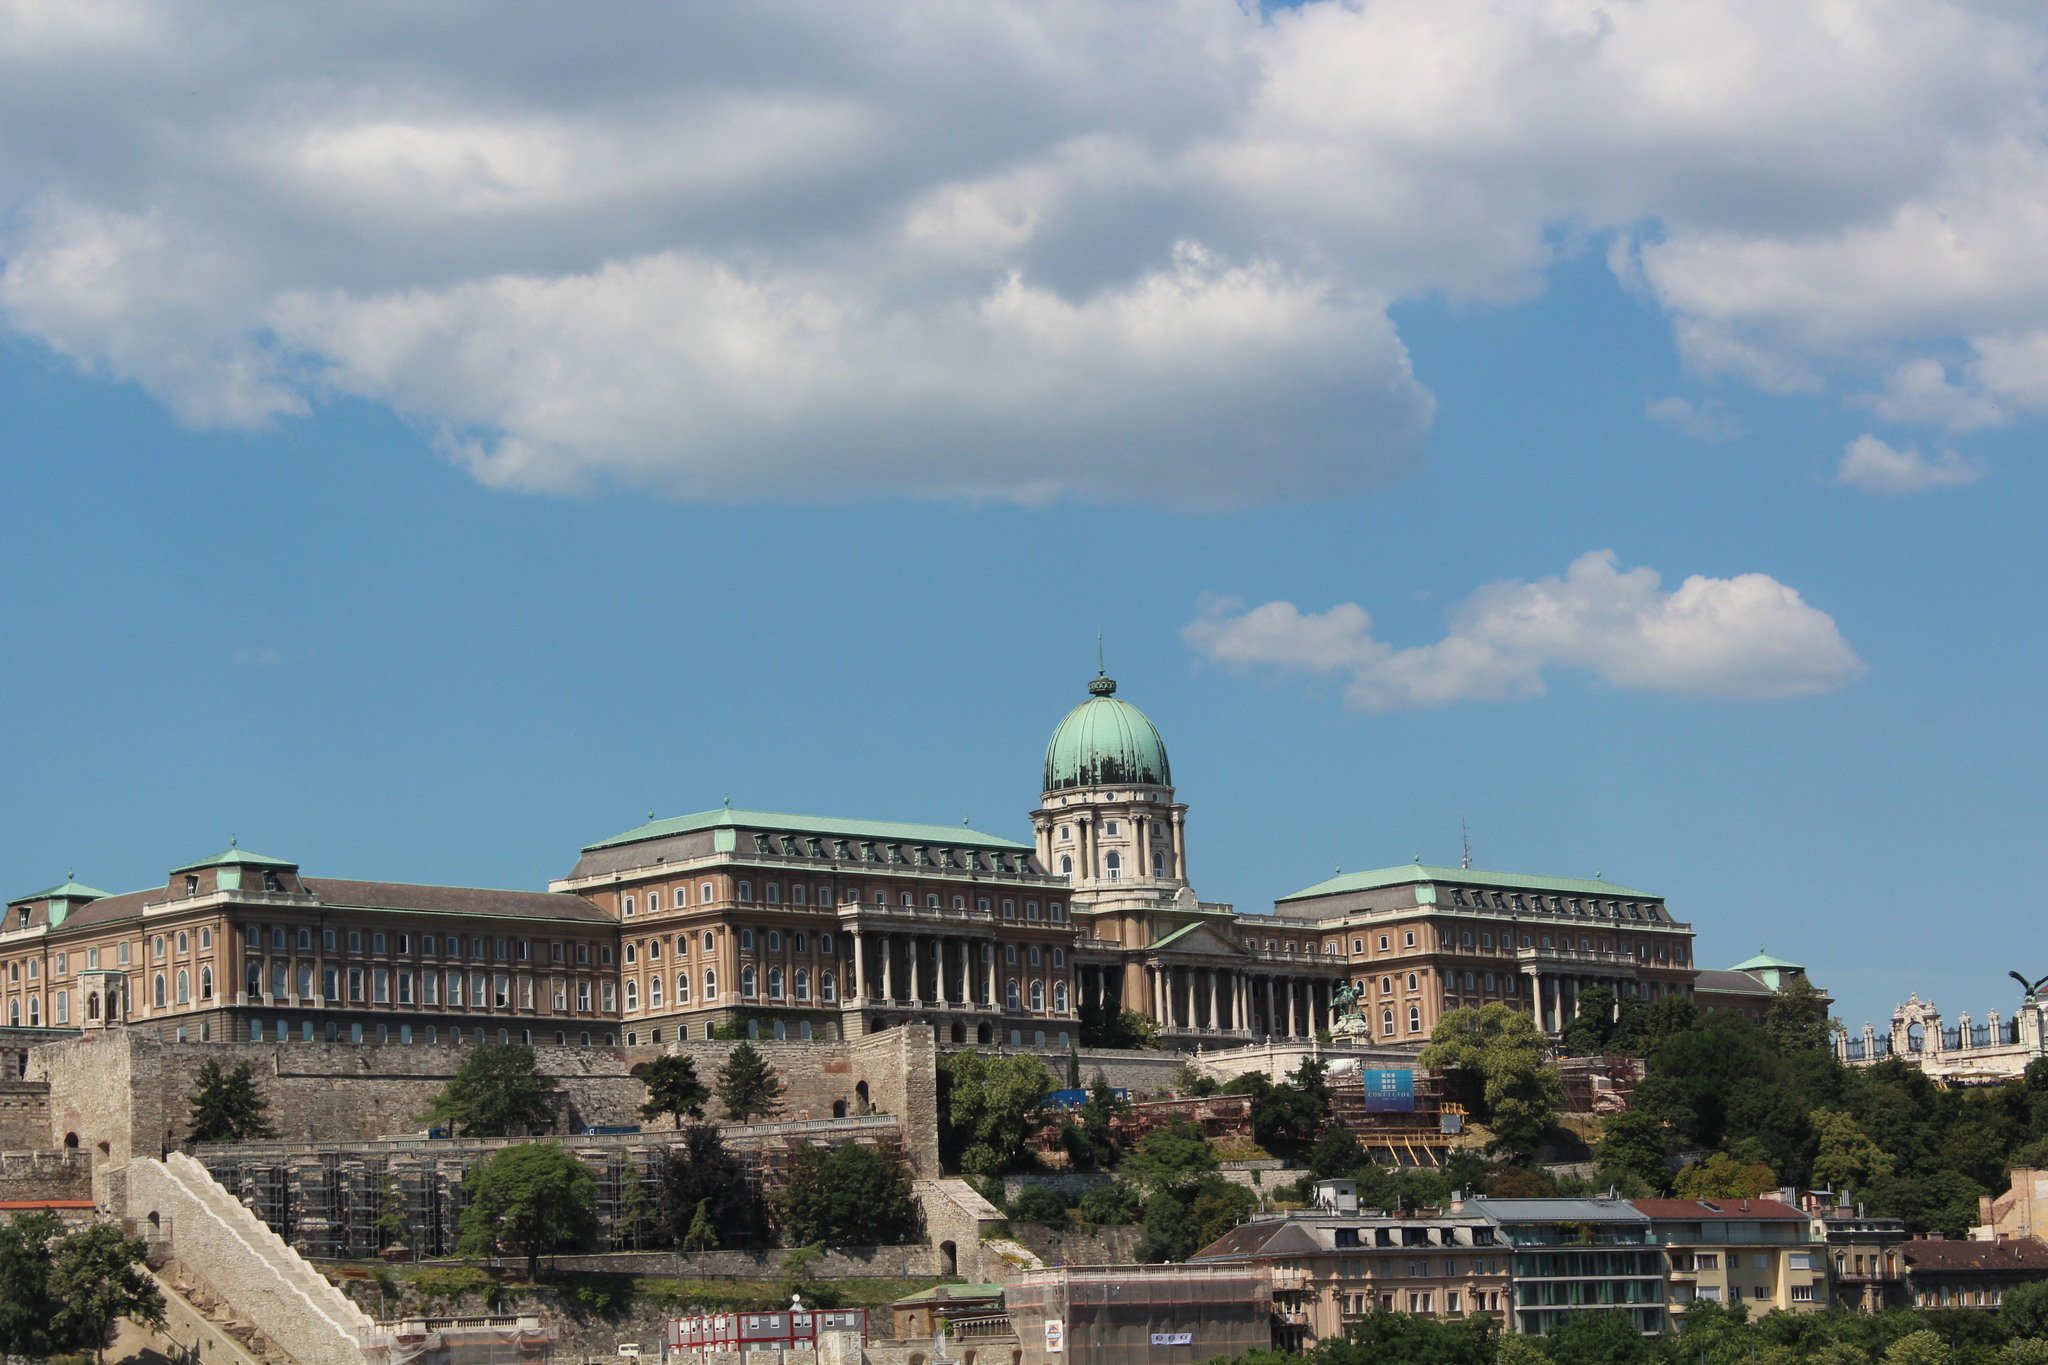 The Buda Castle is being rebuilt - Daily News Hungary